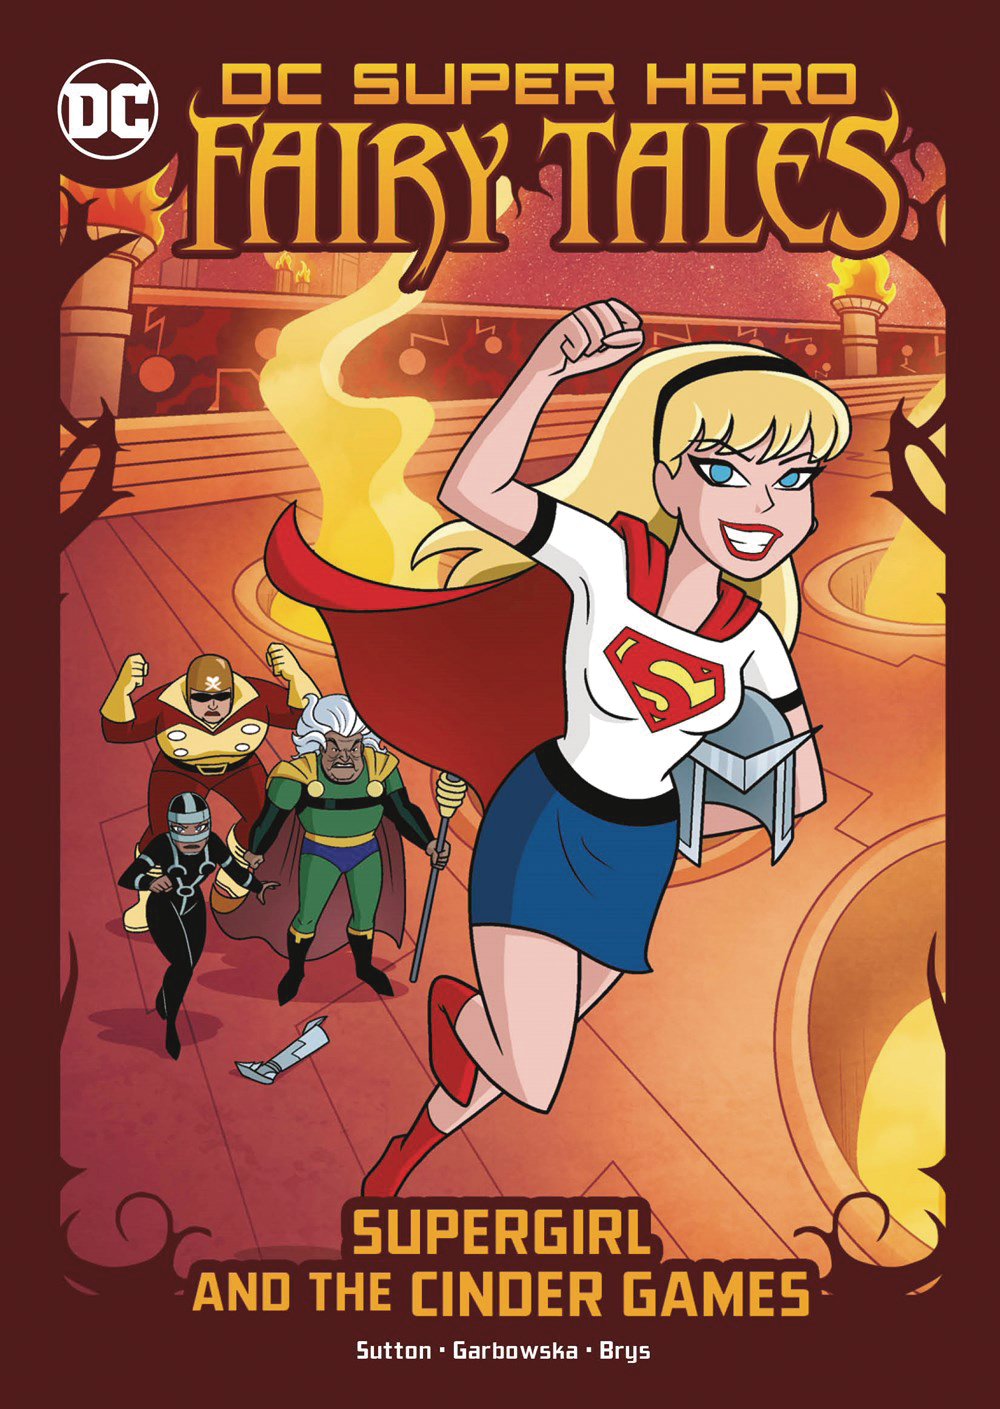 DC Super Hero Fairy Tales #4 Supergirl And Cinder Games